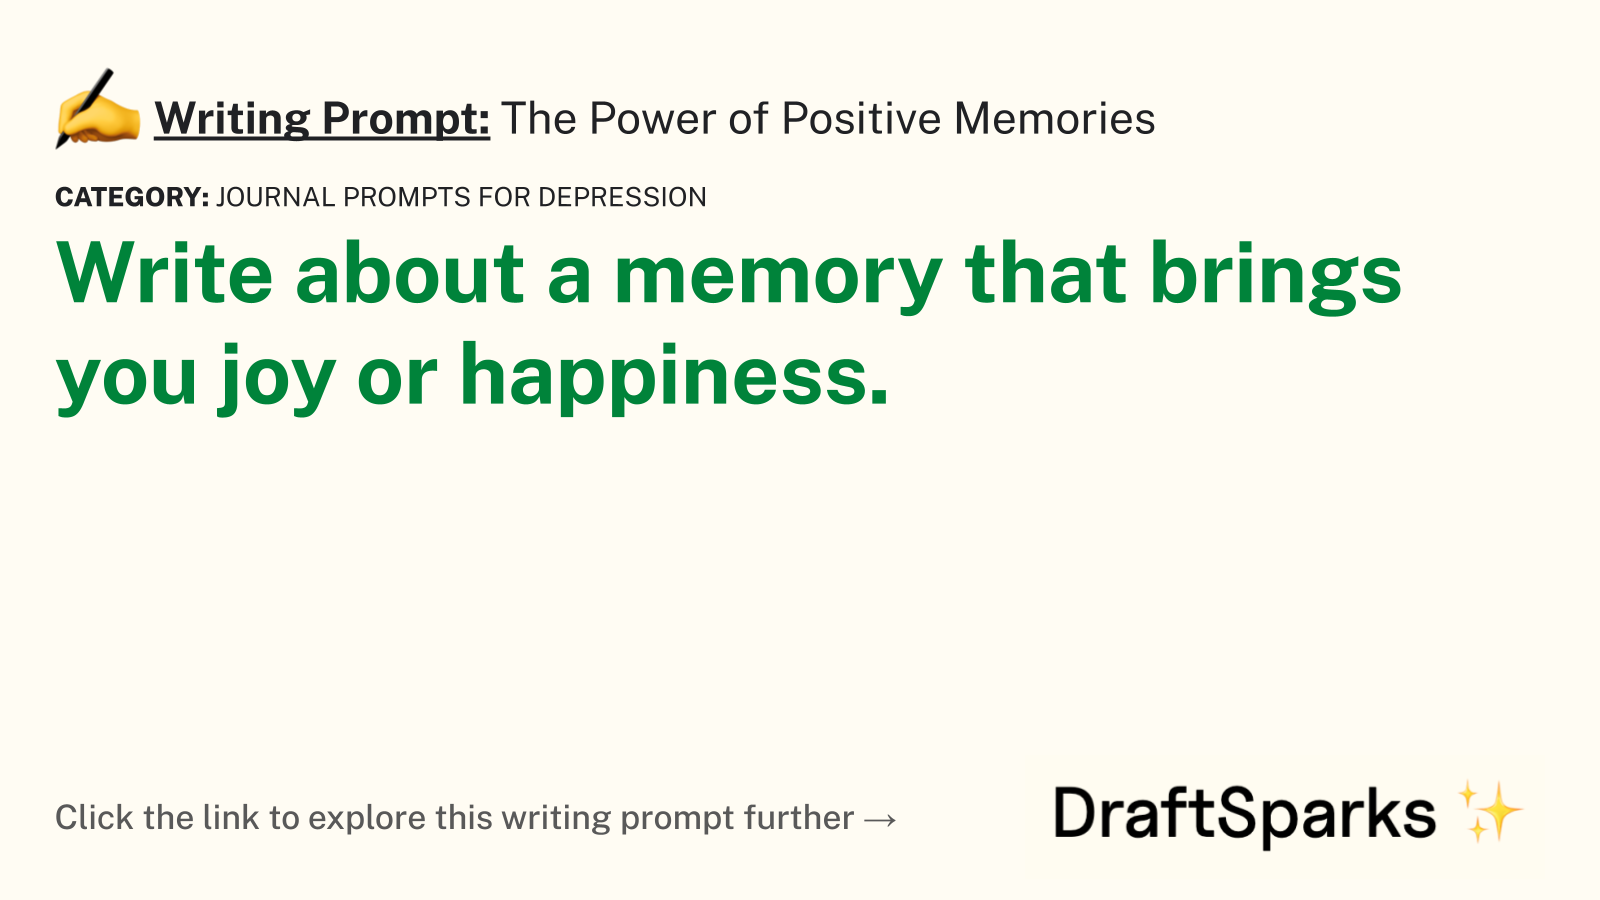 The Power of Positive Memories